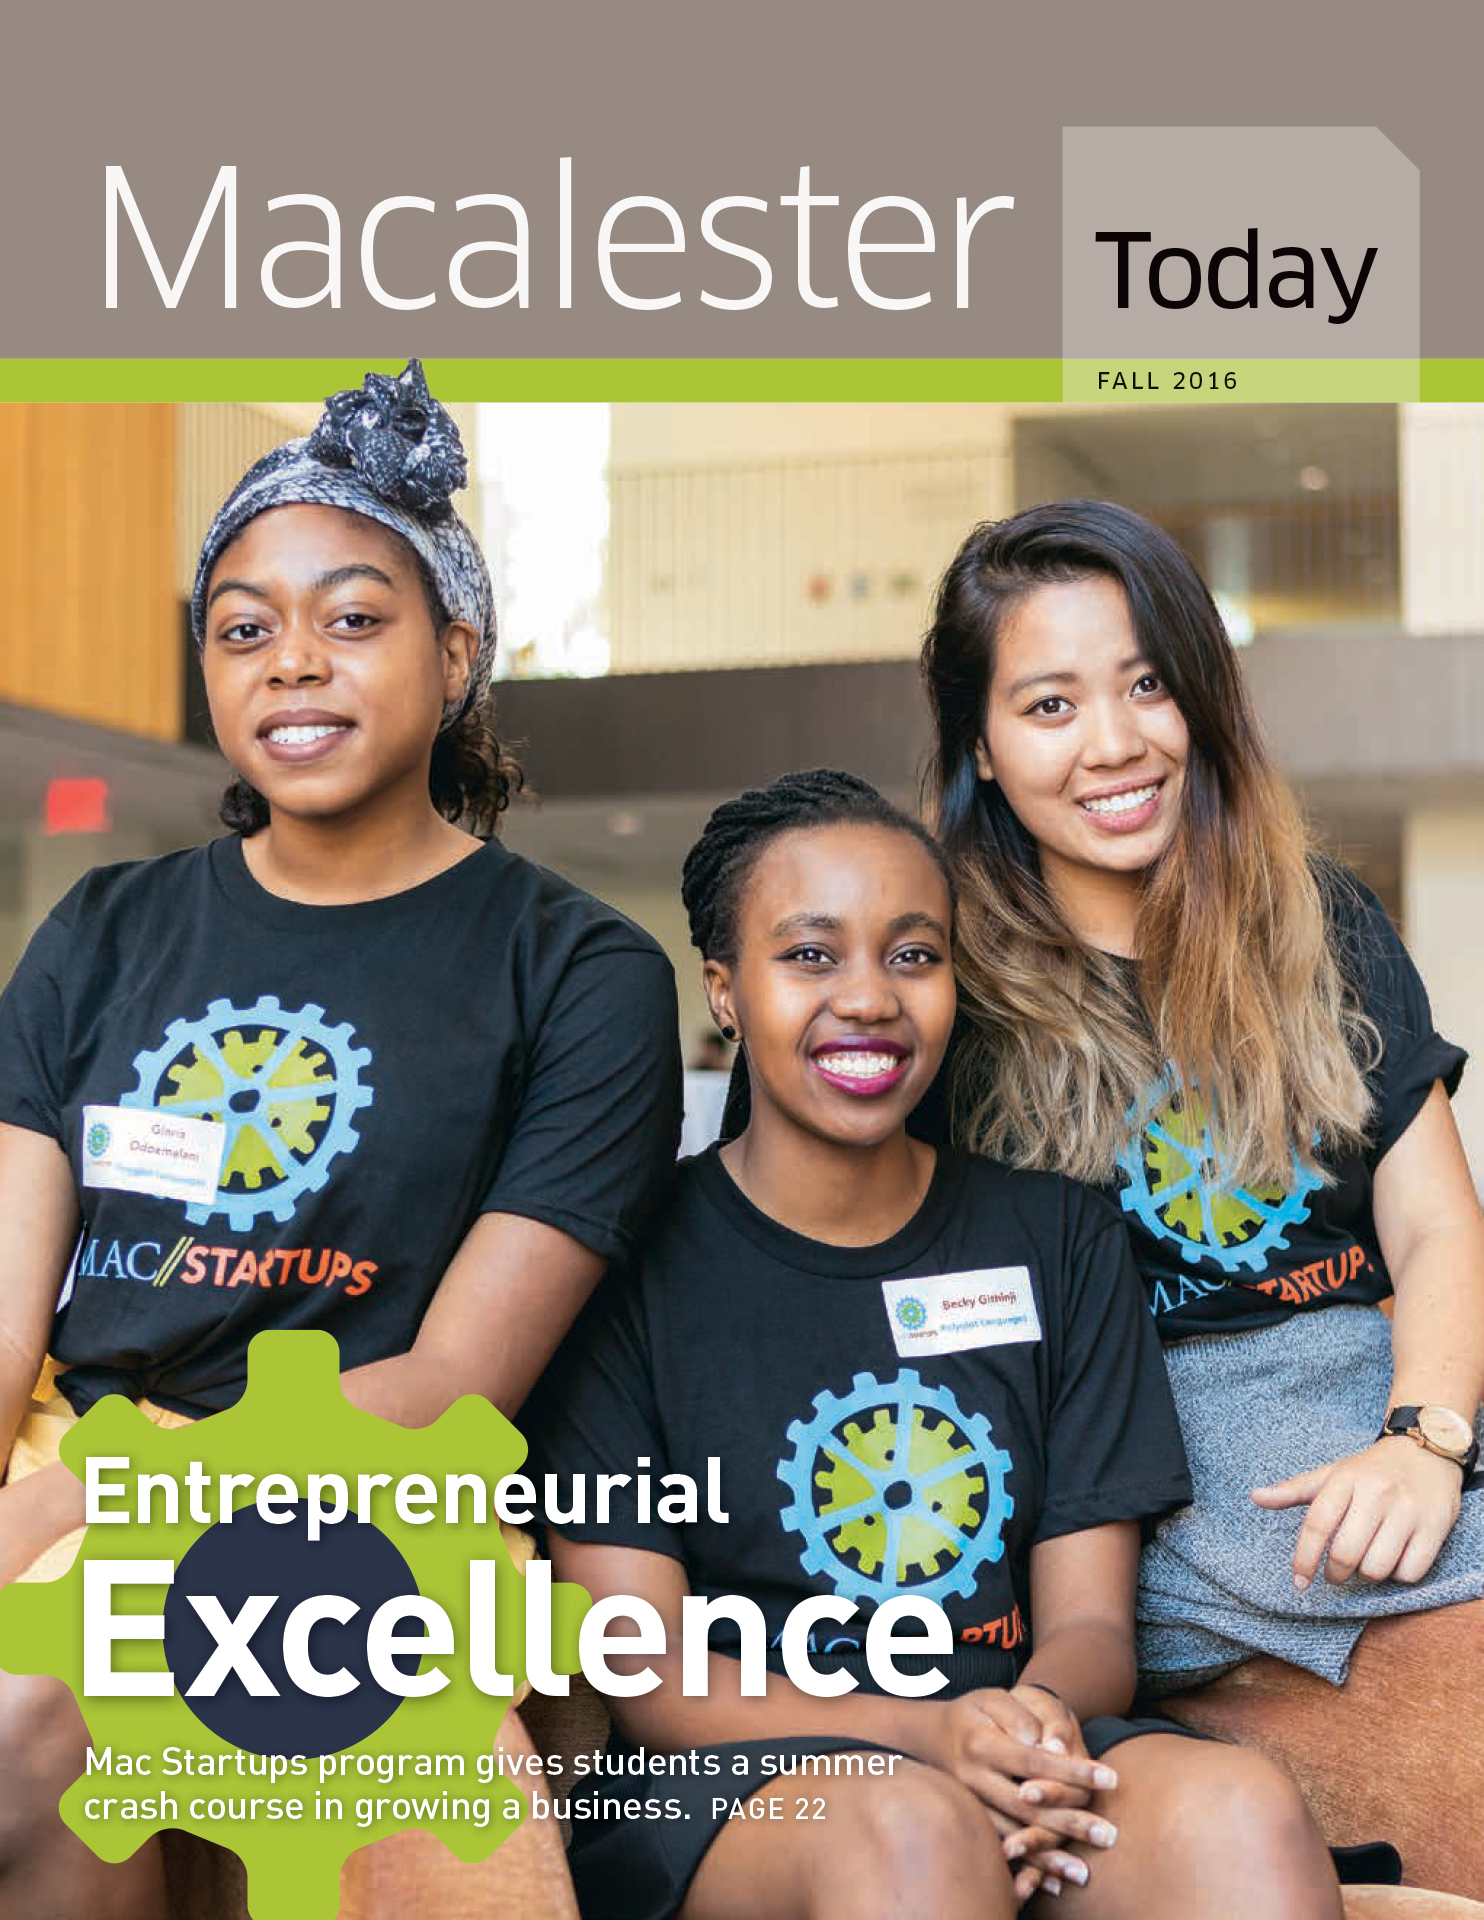 Macalester Today Fall 2016